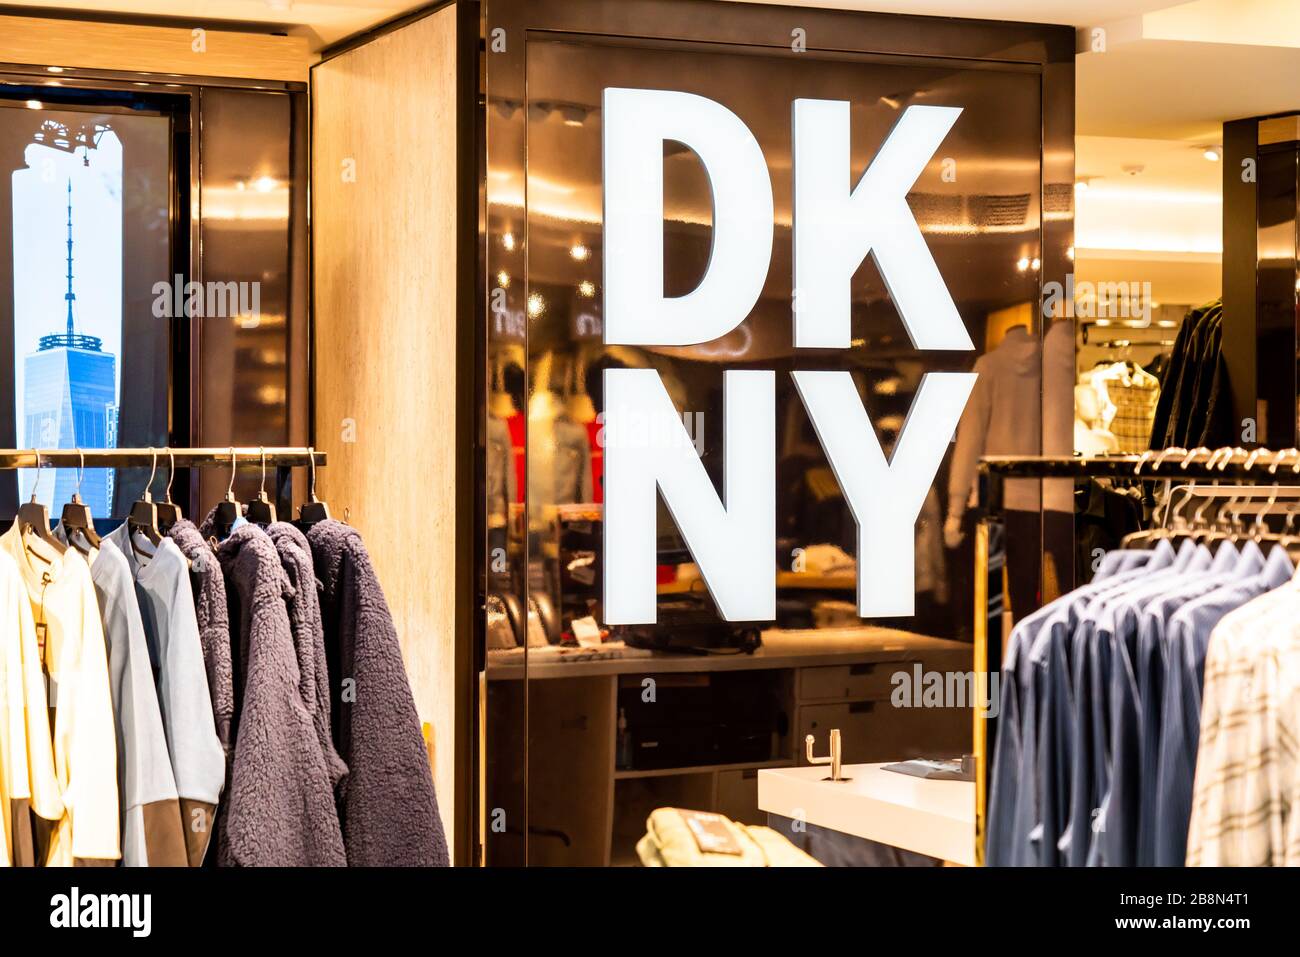 DKNY Middle East Stores (@dkny.me) • Instagram photos and videos